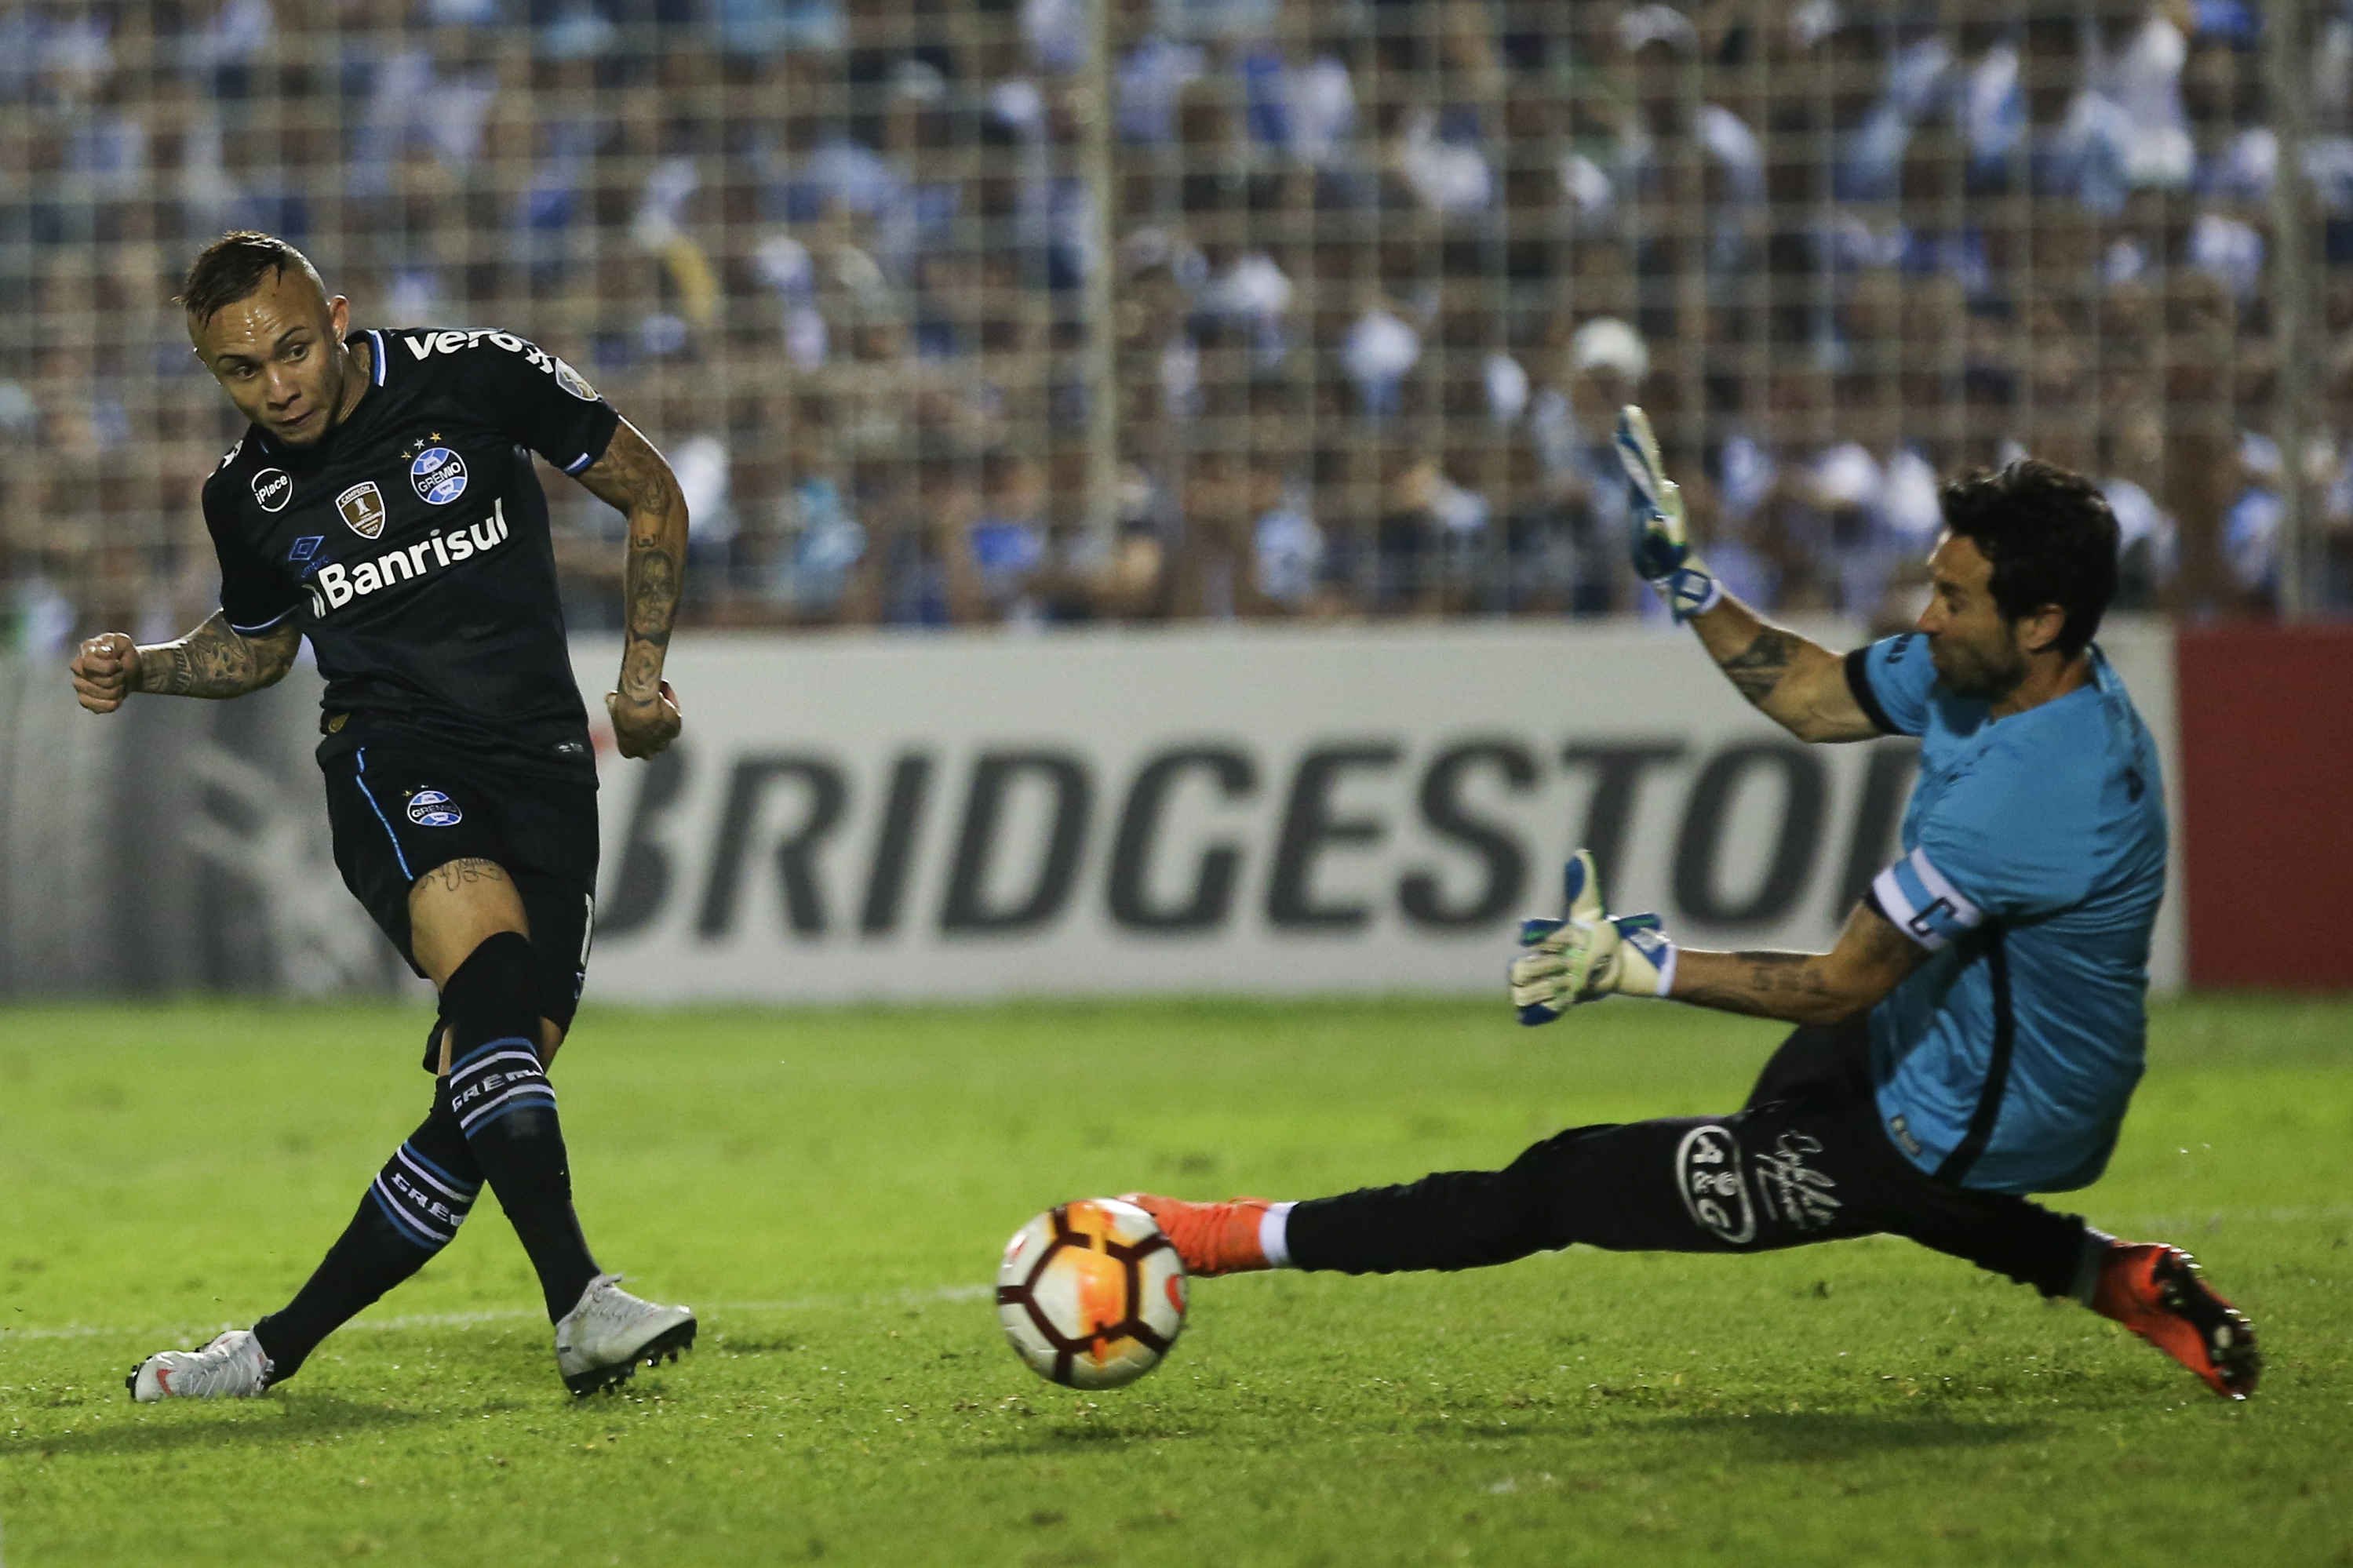 TUCUMAN, ARGENTINA - SEPTEMBER 18:  Everton of Gremio misses a chance to score as Cristian Lucchetti of Atletico Tucuman tries to stop the ball during a quarter final first leg match between Atletico Tucuman and Gremio as part of Copa CONMEBOL Libertadores 2018 at Estadio Monumental Jose Fierro on September 18, 2018 in Tucuman, Argentina.   (Photo by Agustin Marcarian/Getty Images)